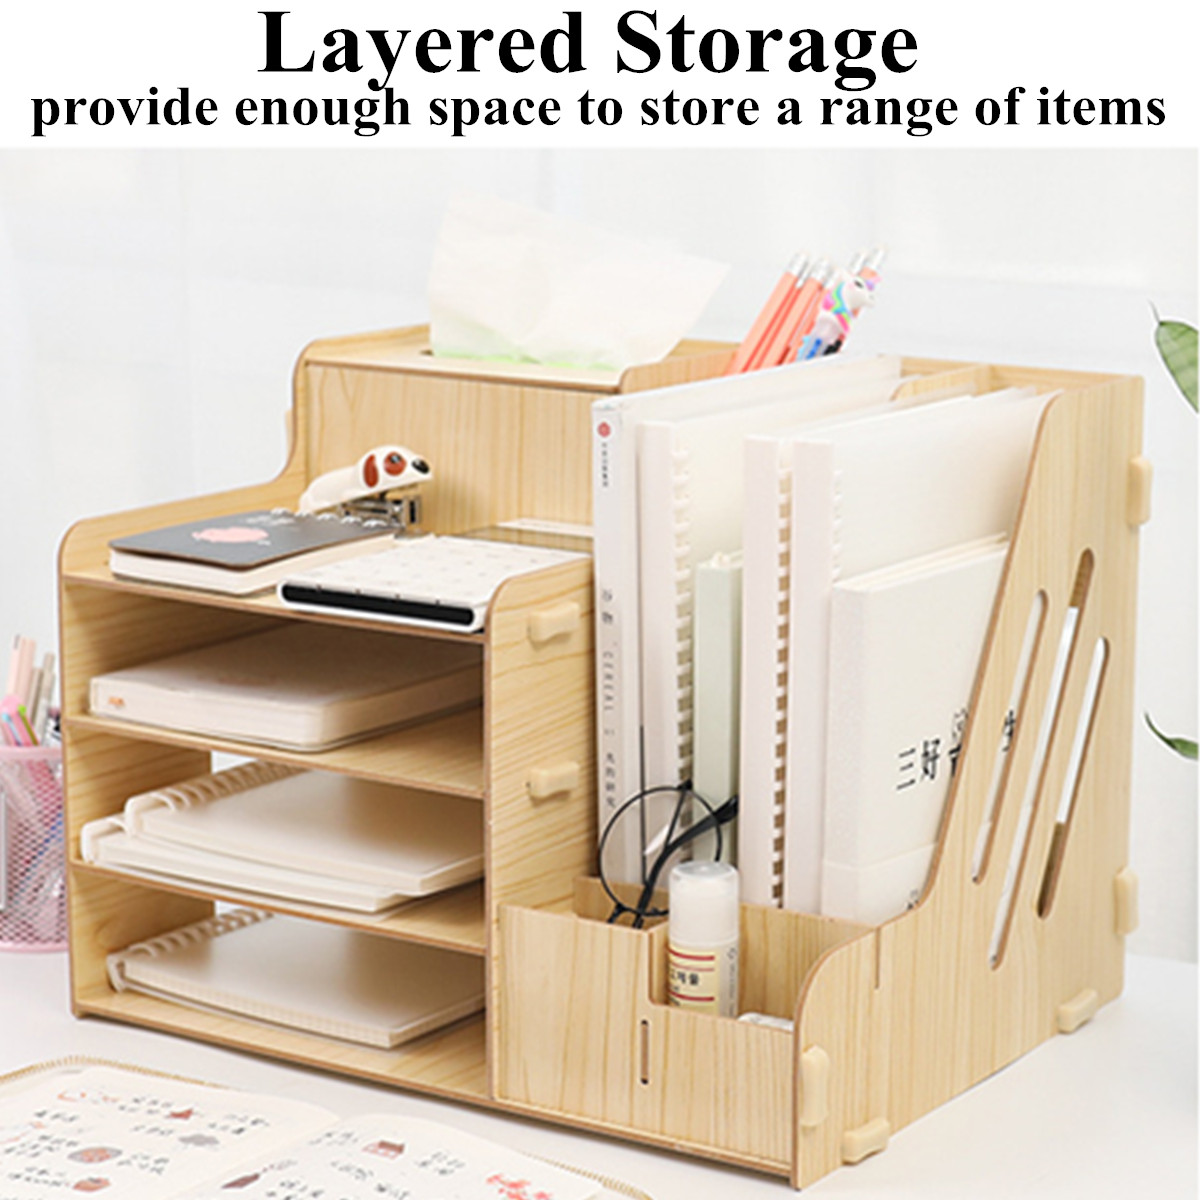 Stationery-Container-Desktop-Drawer-Organizer-Desktop-Storage-Box-Brush-Container-Office-Pencil-Hold-1603946-2